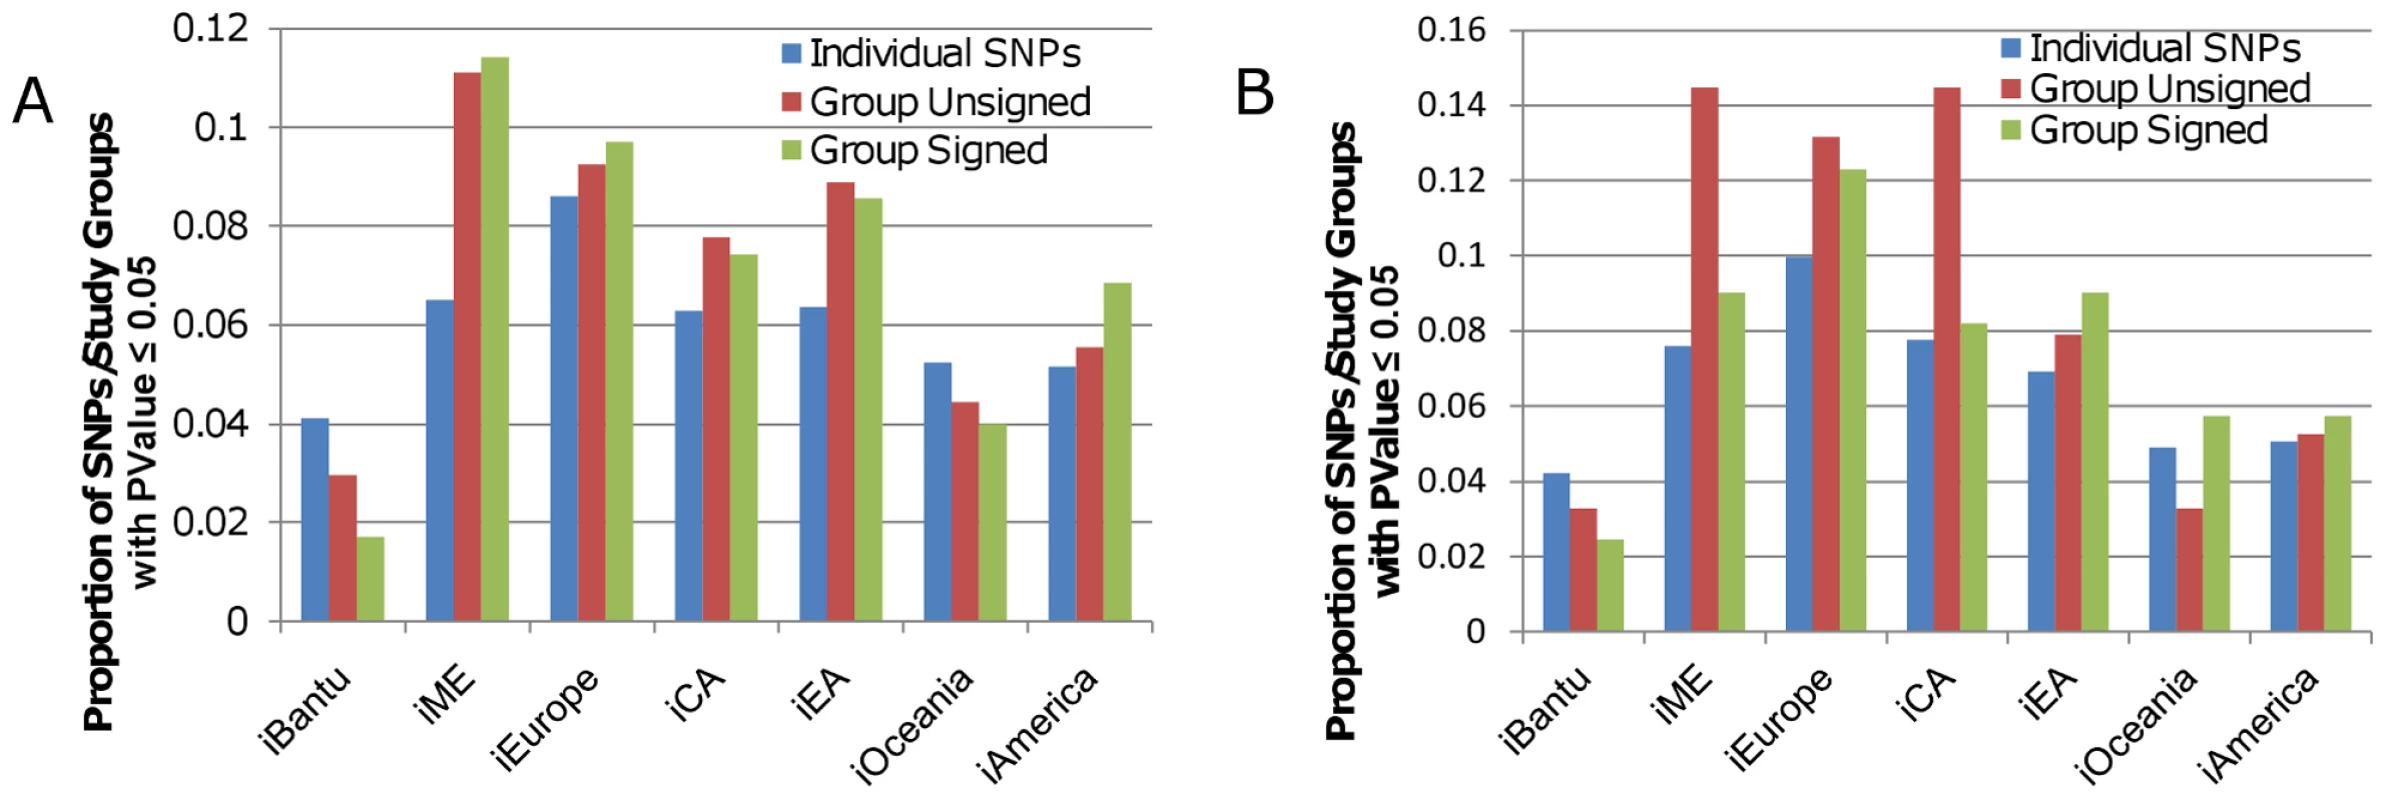 Proportion of SNPs and study groups with P-values ≤0.05 for iHS scores.